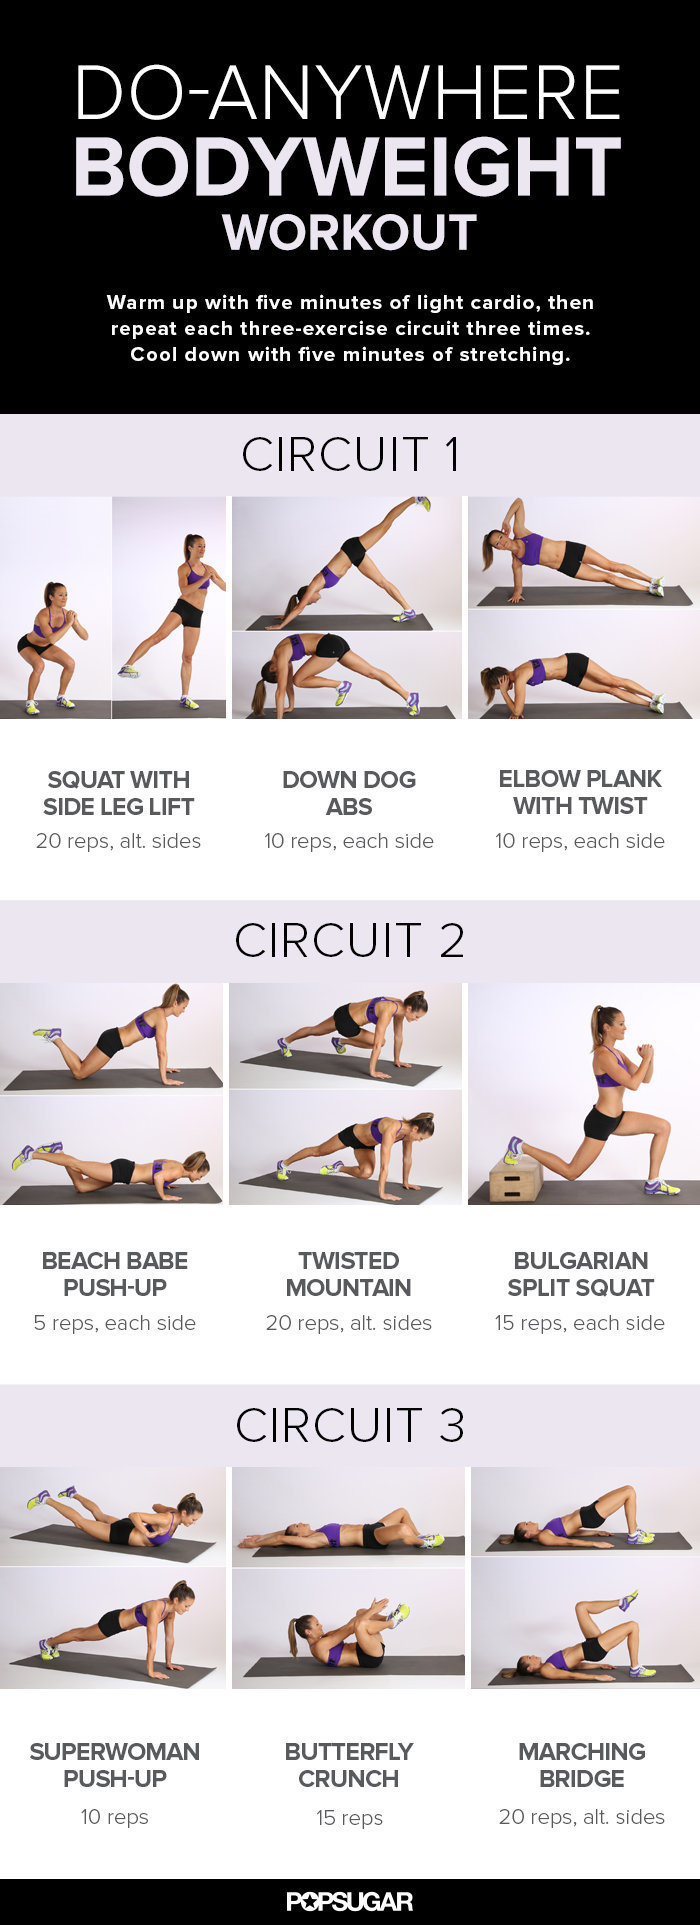 fitness-health-well-being-summer-prep-do-anywhere-bodyweight